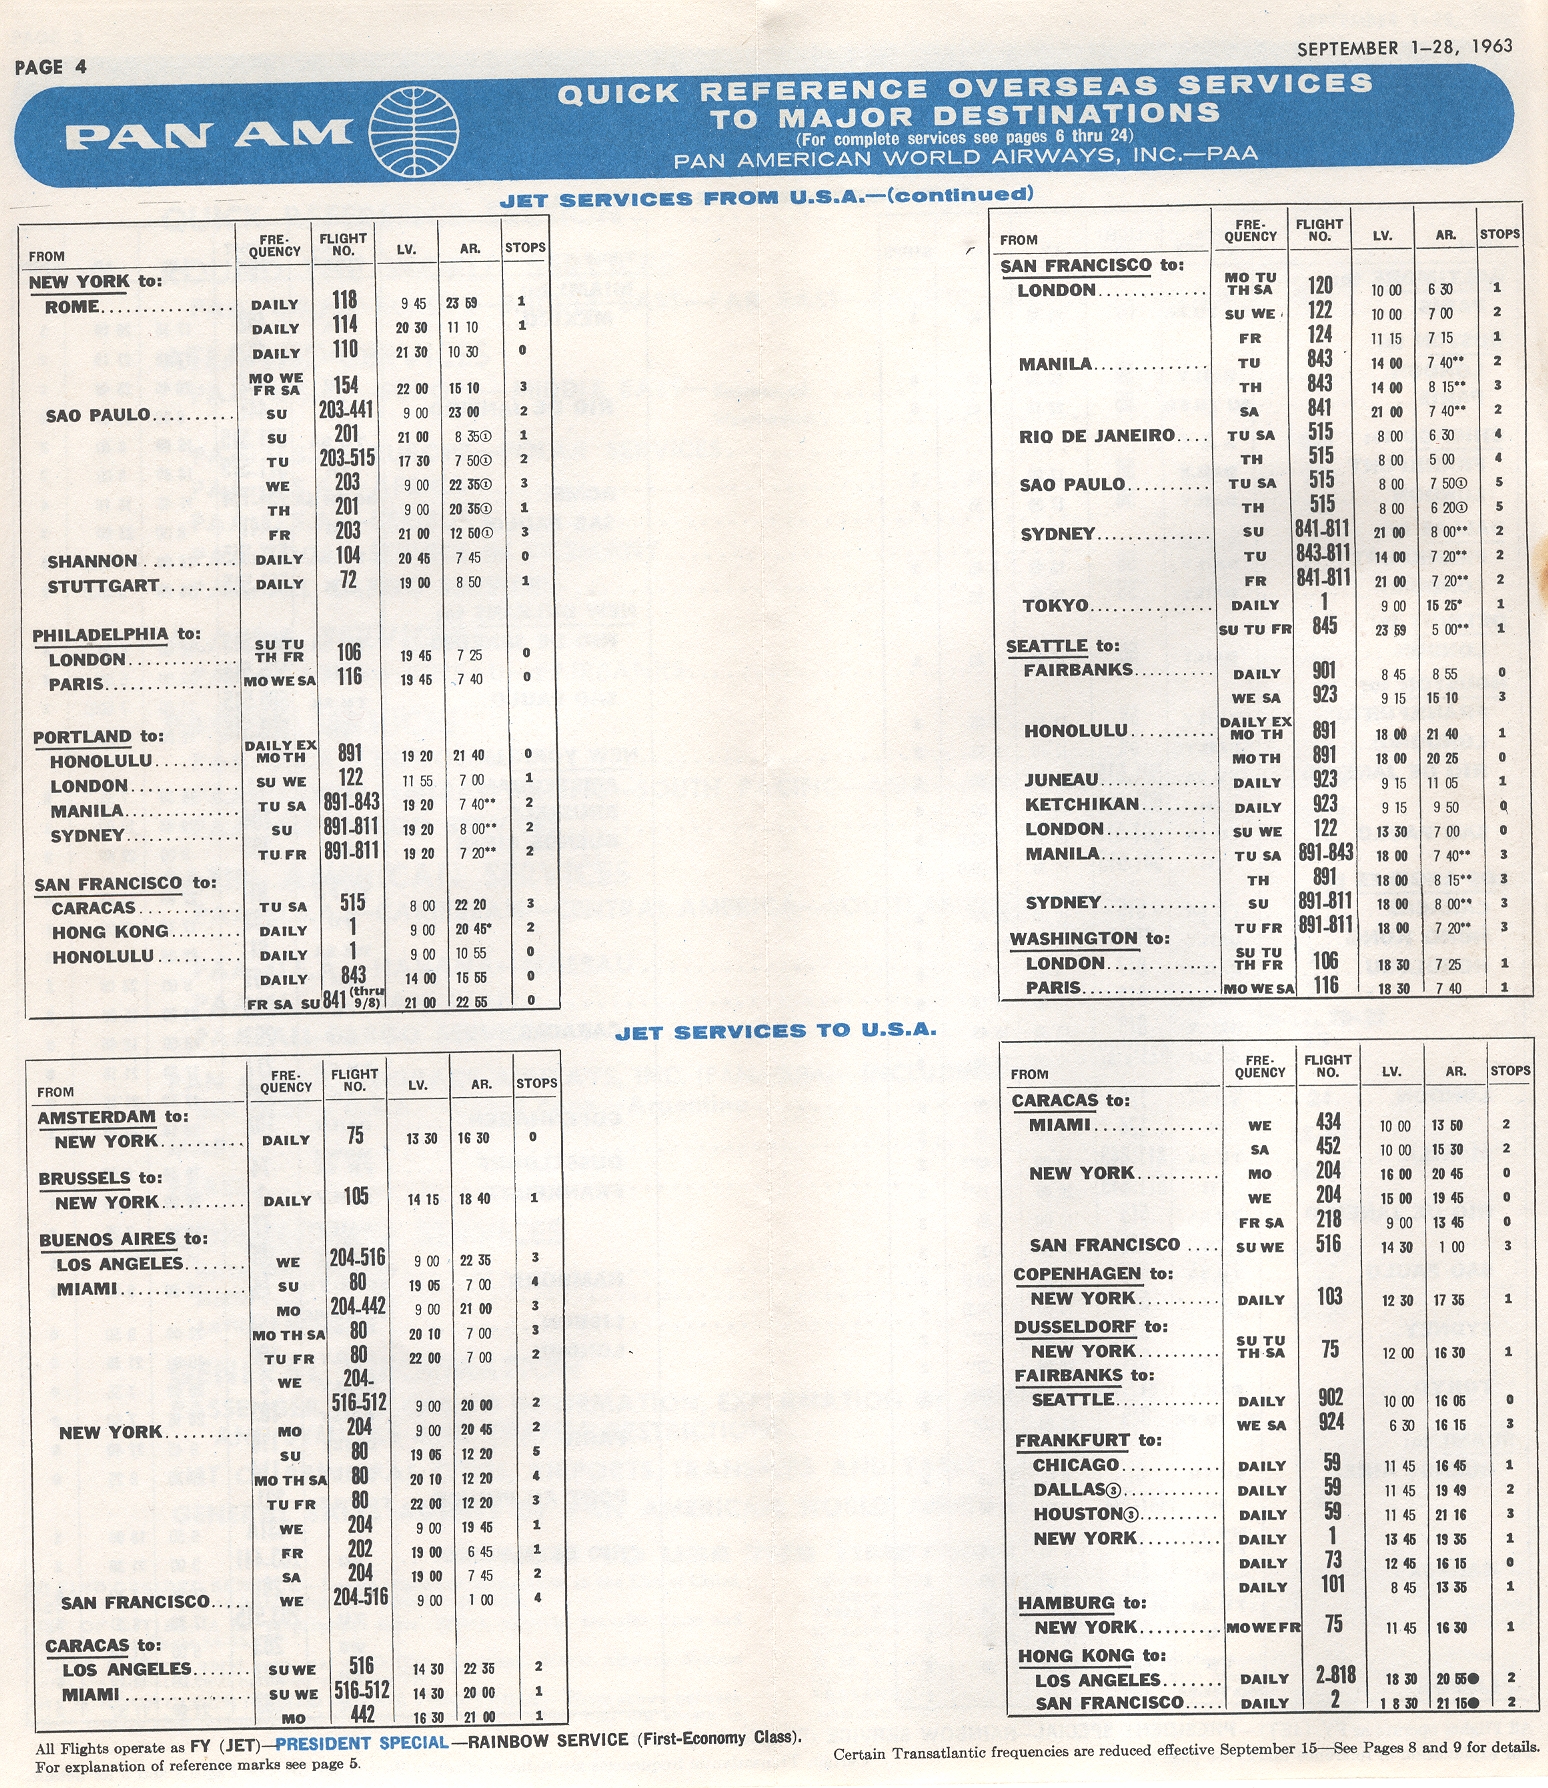 1963, September 1-30  Quick Reference Schedule page 2.